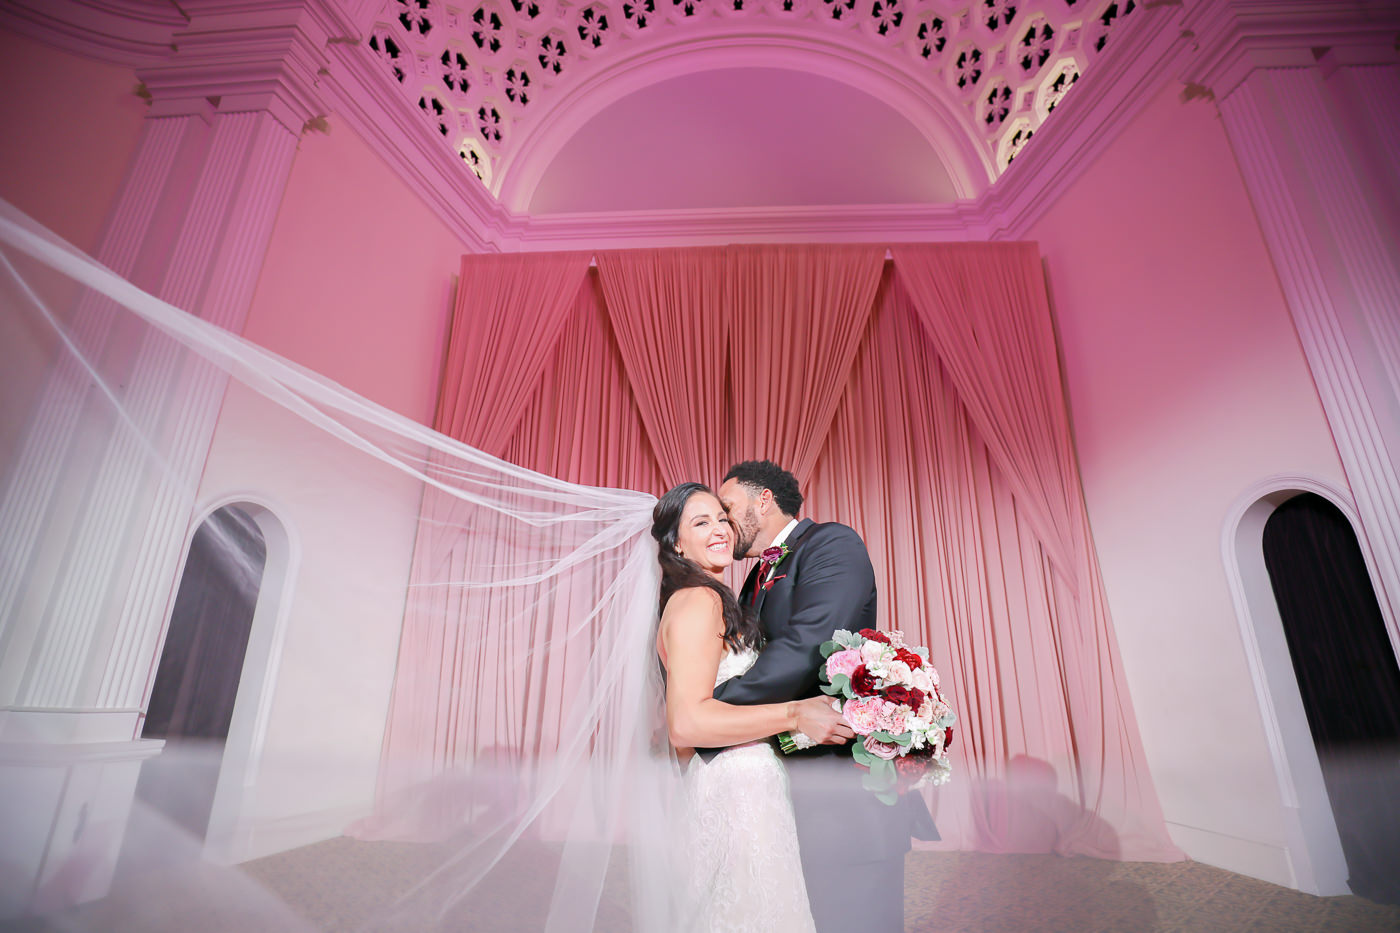 Creative Bride and Groom Wedding Portrait with Veil Blowing | Wedding Photographer Lifelong Photography Studios | Tampa Bay Wedding Planner Blue Skies Weddings and Events | St. Petersburg Wedding Venue Bridgepoint Church | Dusty Rose Draping Gabro Event Services